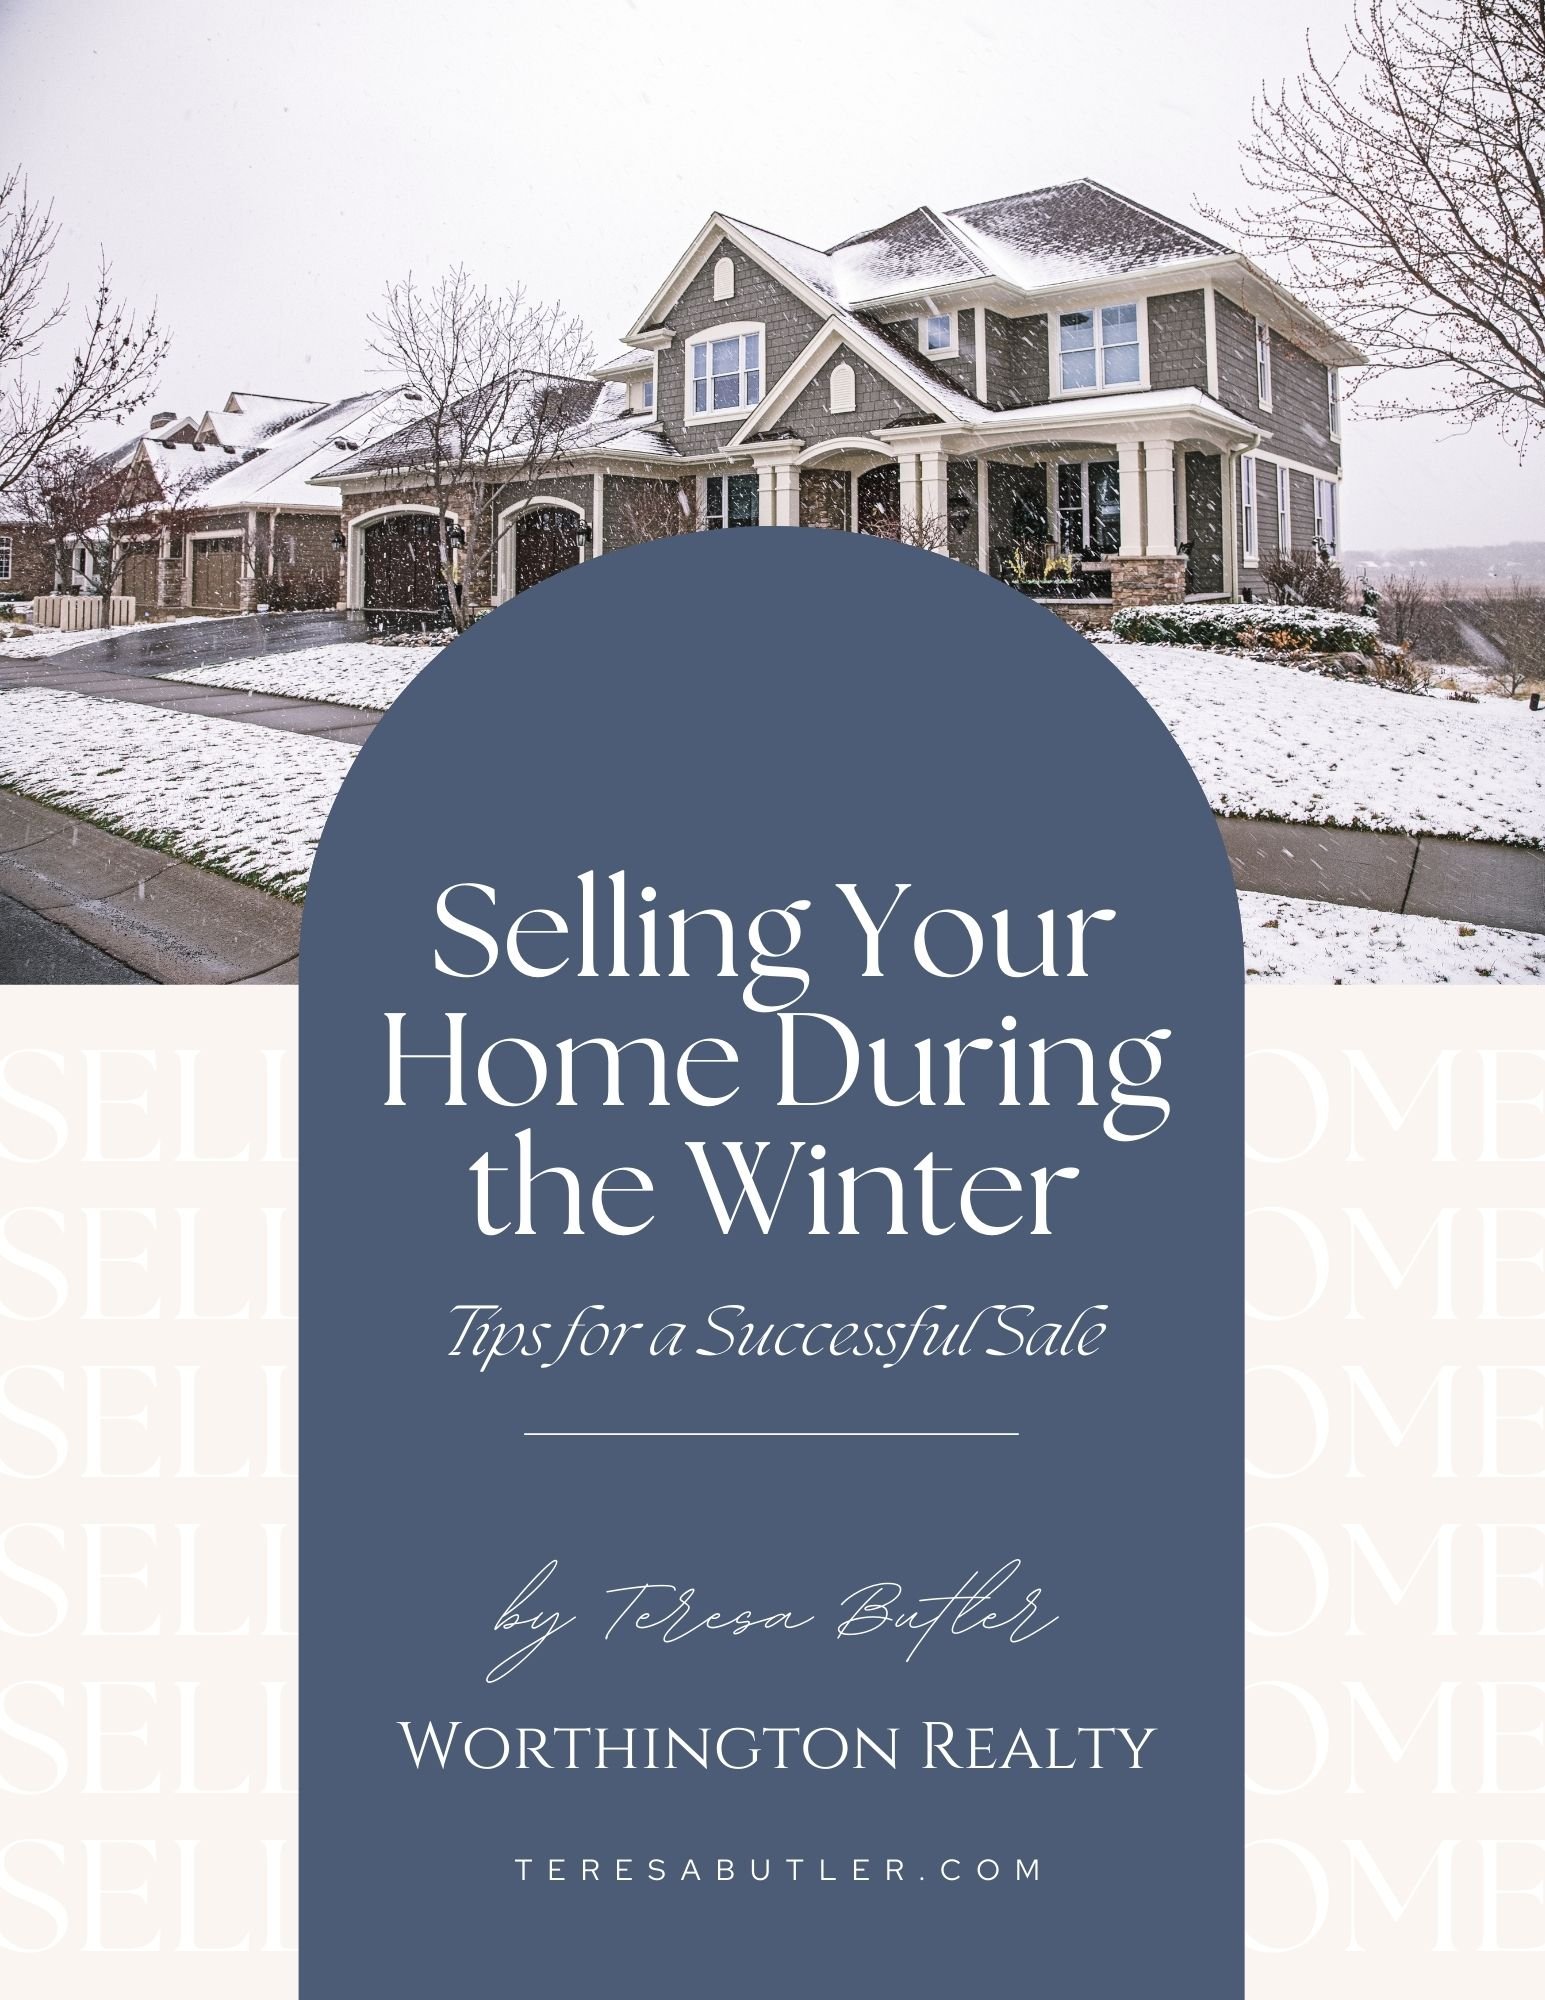 Selling Your Home During the Winter